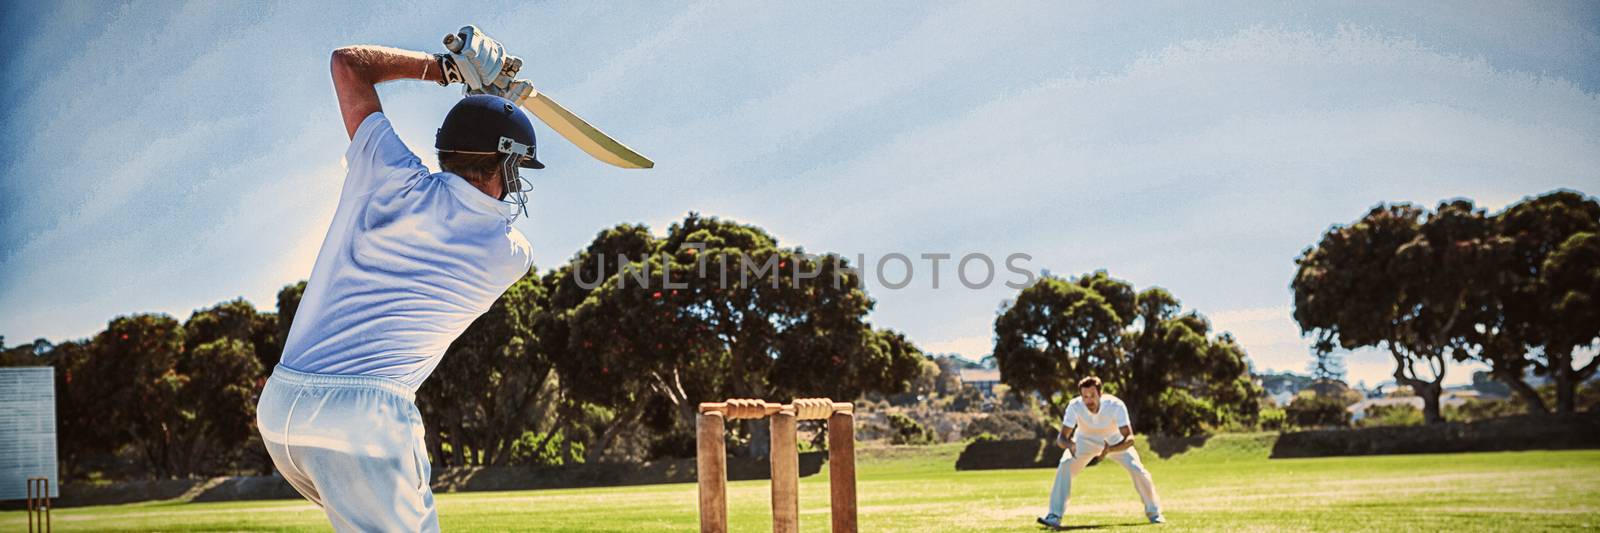 Rear view of player batting while playing cricket on field against clear sky